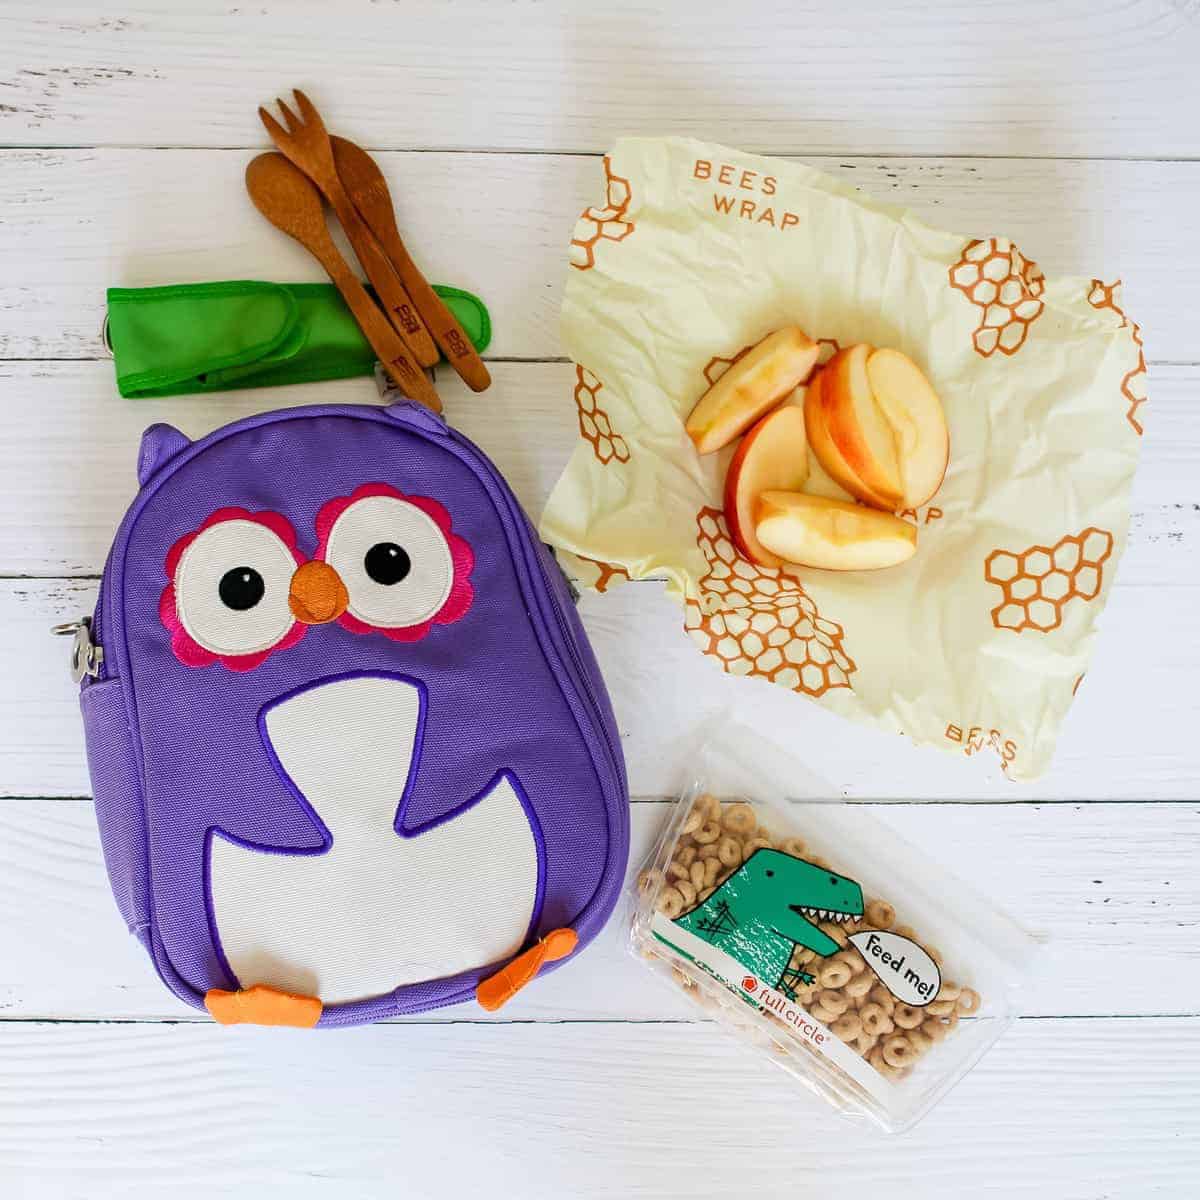 Eco-friendly Essentials To Pack A Plastic-free School Lunch